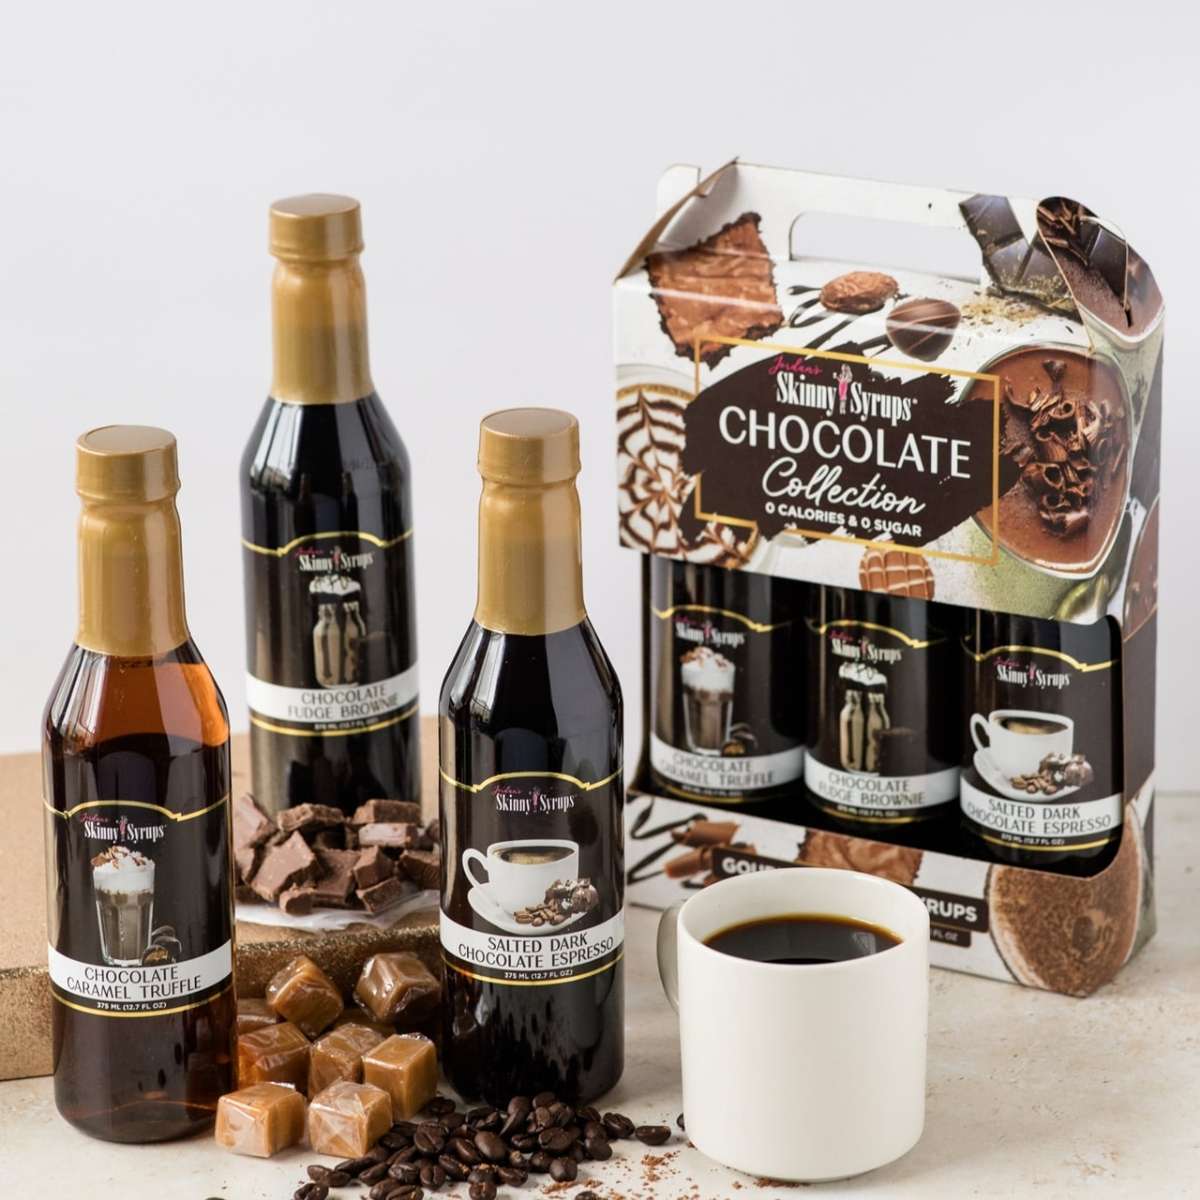 A delicious assortment of our favorite Chocolate Skinny Syrups in a eye-catching gift box. The Chocolate Skinny Syrup flavors are Salted Dark Chocolate Espresso Syrup, Chocolate Caramel Truffle Syrup, and Chocolate Fudge Brownie Syrup. Add  to coffees, lattes, mochas, cappuccinos, desserts, or oatmeal.  